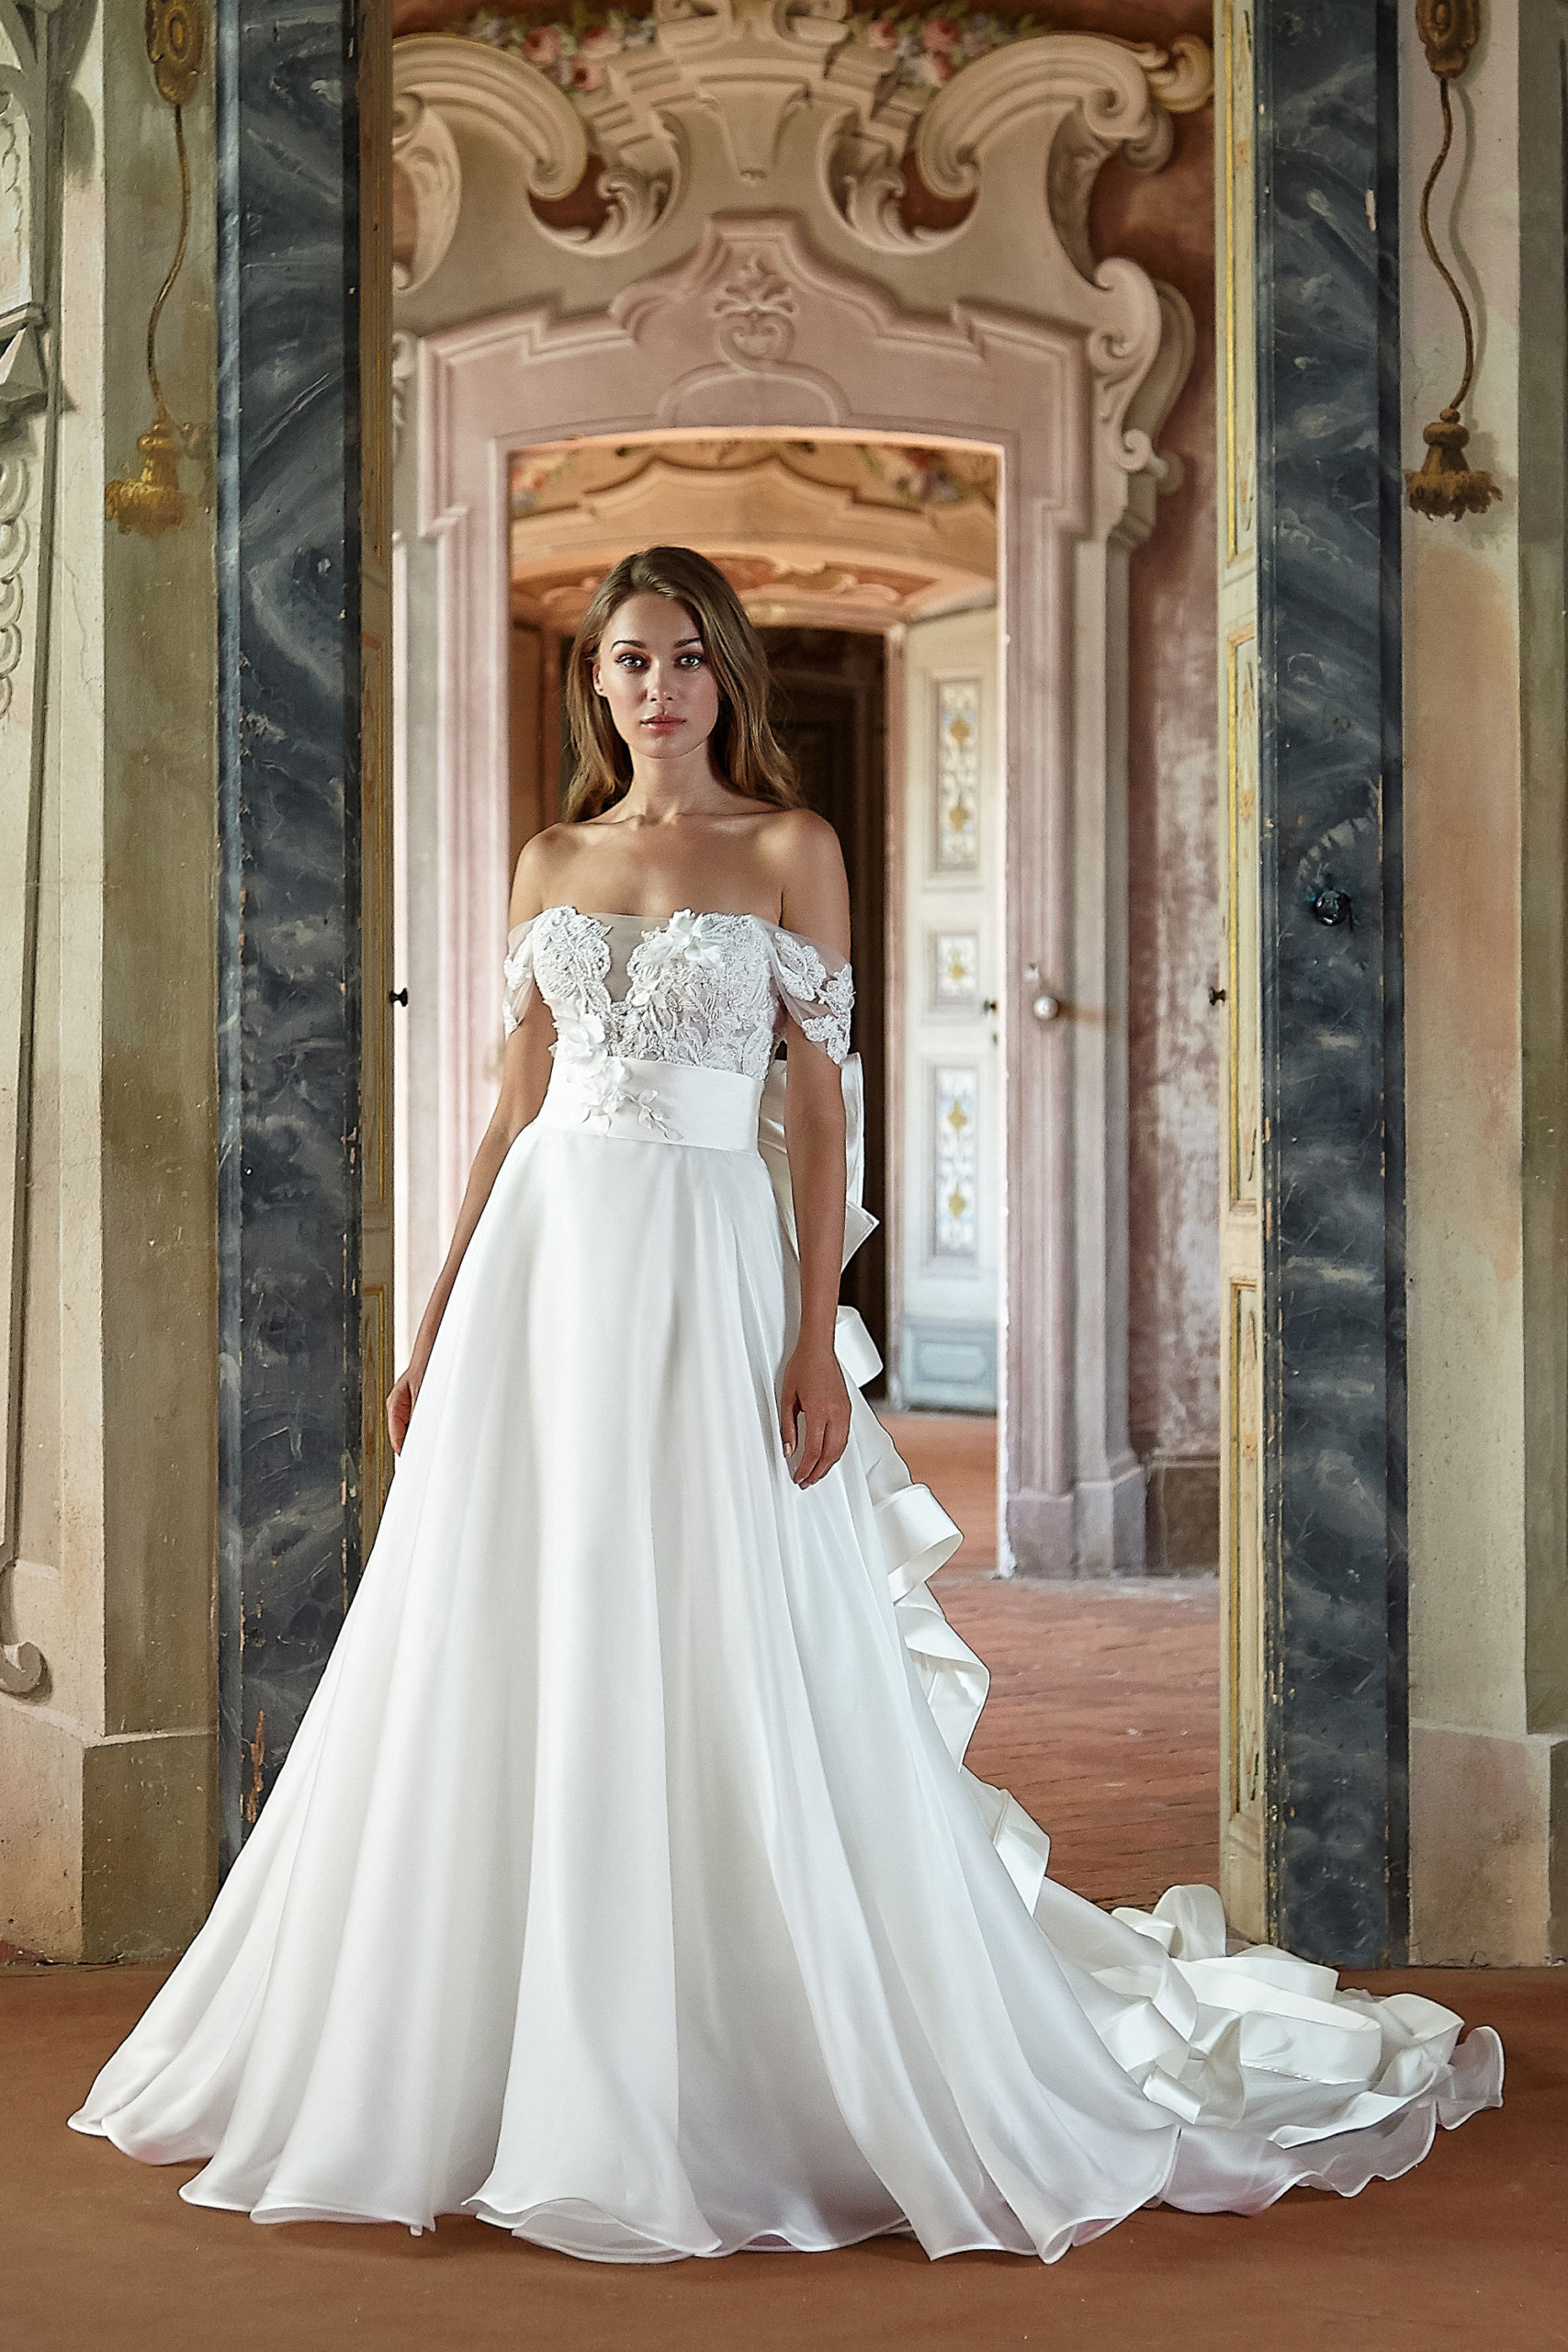 Looking for the Perfect Wedding Dress? Discover Stefano Blandaleone in Casale Monferrato and in the Main Ateliers of Italy!